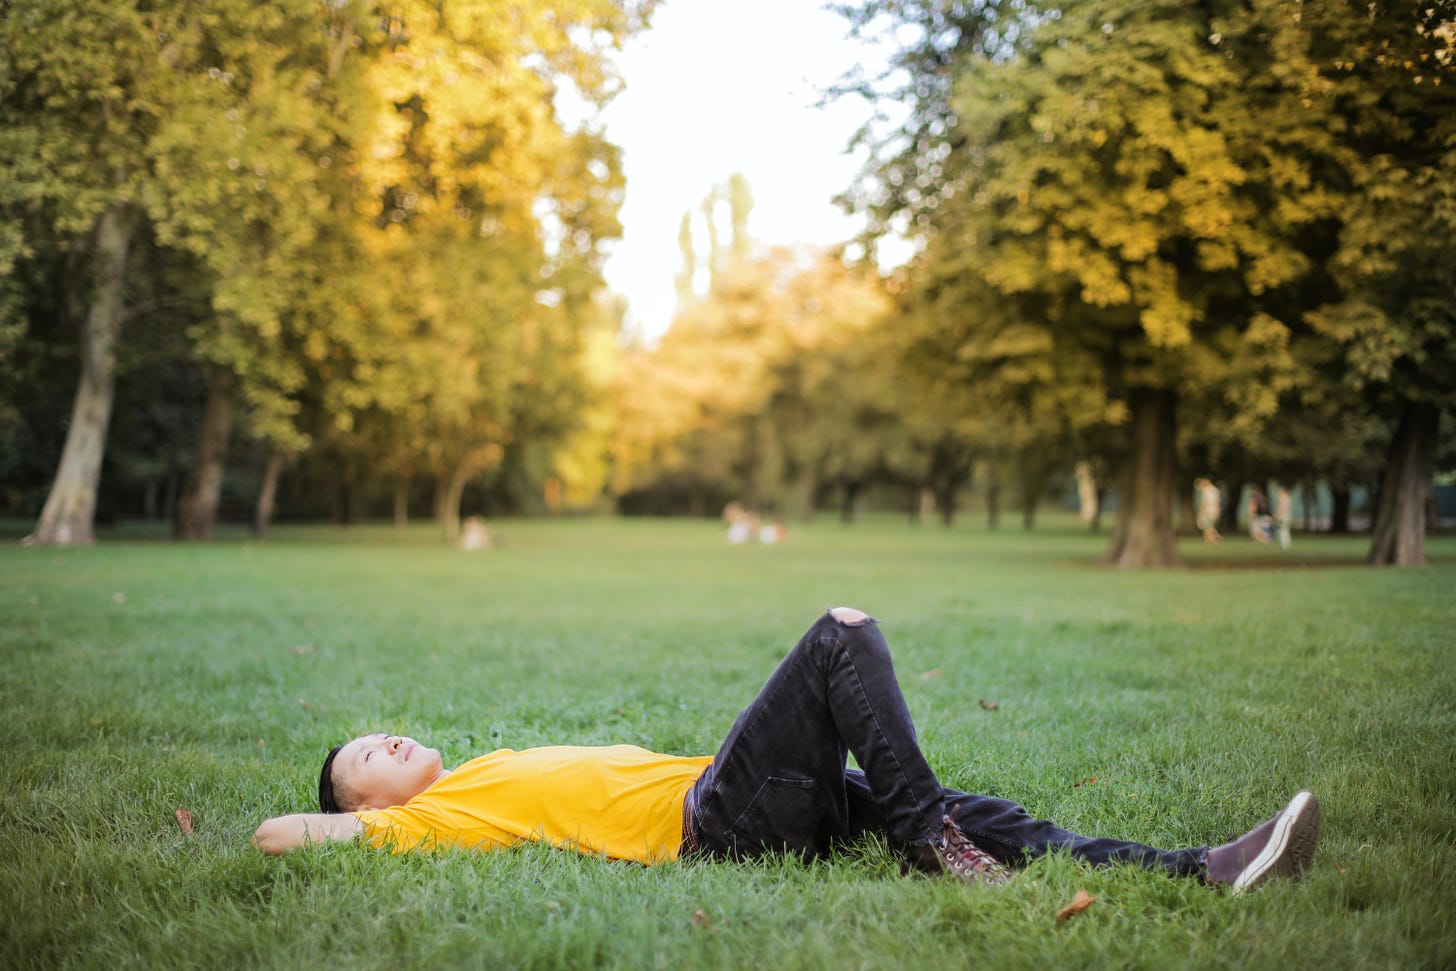 A man in a yellow shirt lying in a grassy field looking up at the sky.